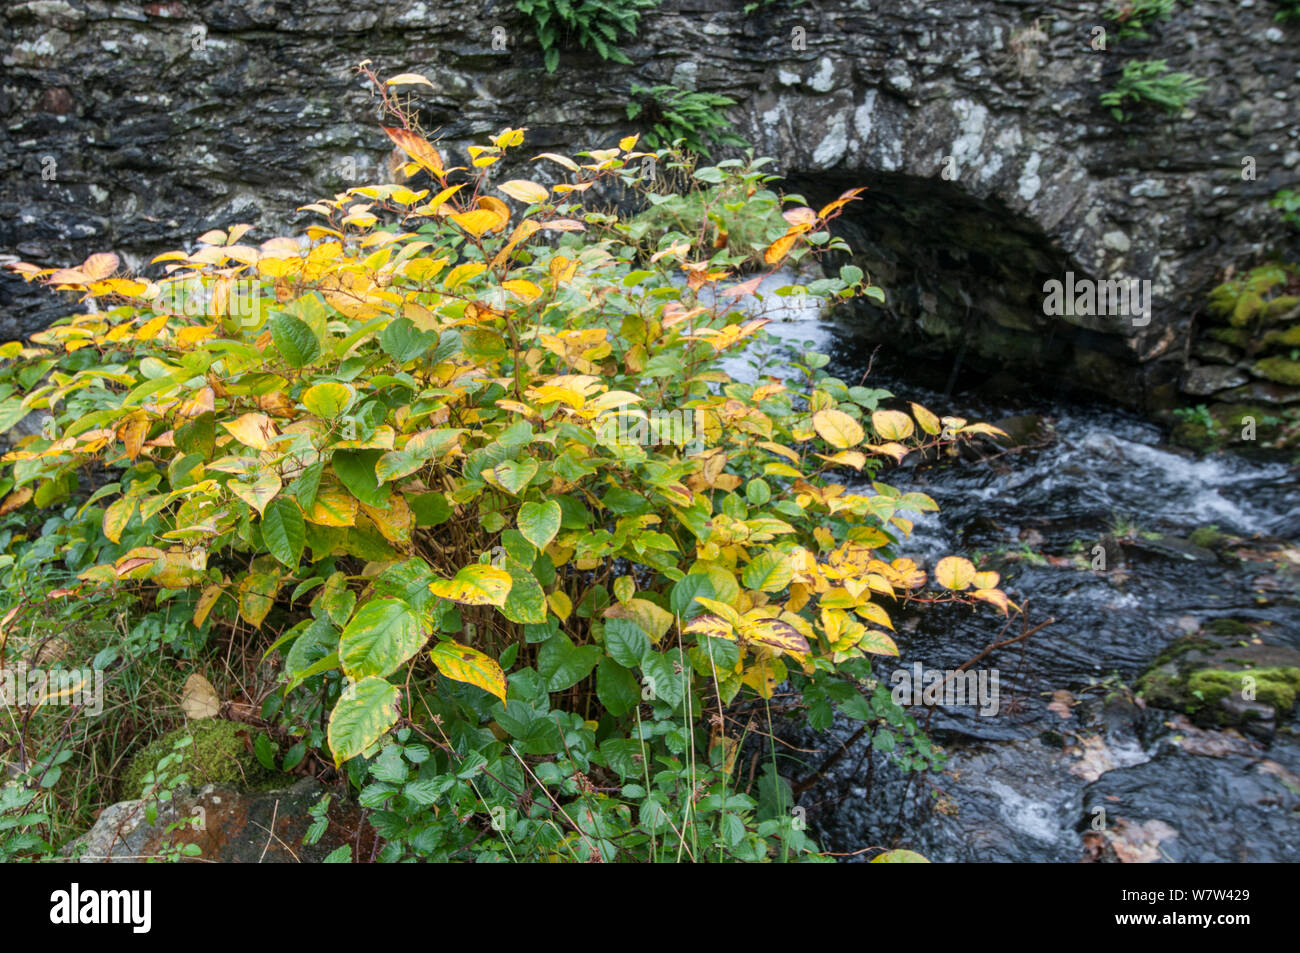 Japanese Knotweed (Fallopia japonica) growing alongside stream in Snowdonia National Park, Wales, UK, October. Stock Photo